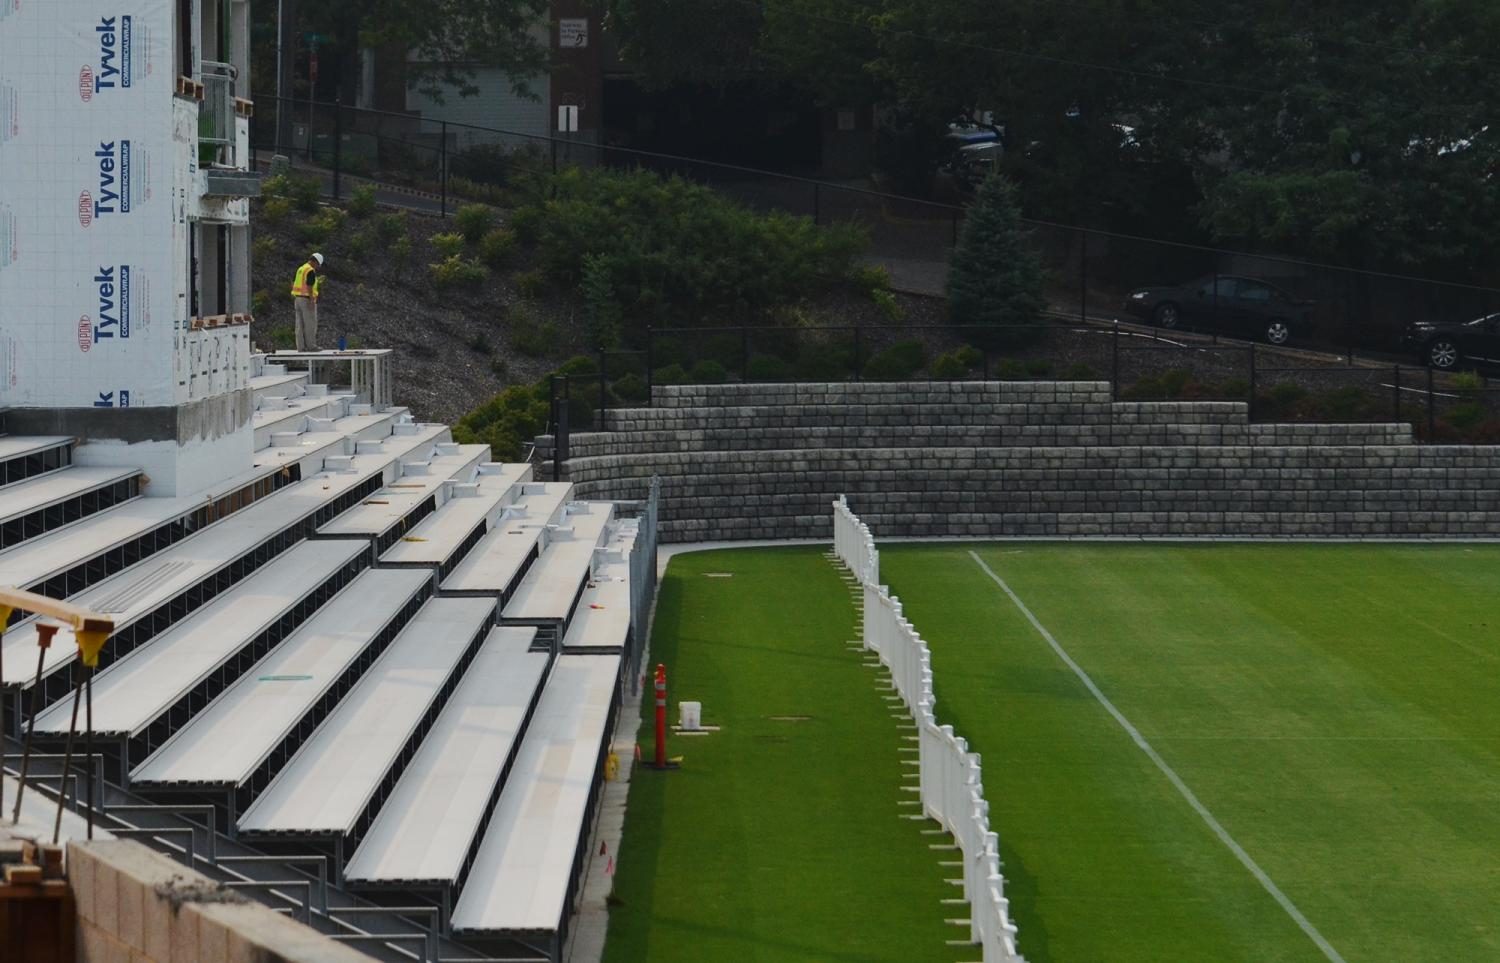 Workers+finish+up+improvements+to+the+WSU+soccer+field+Aug.+9.+Renovations+were+originally+expected+%0Ato+be+completed+well+before+the+start+of+the+season.